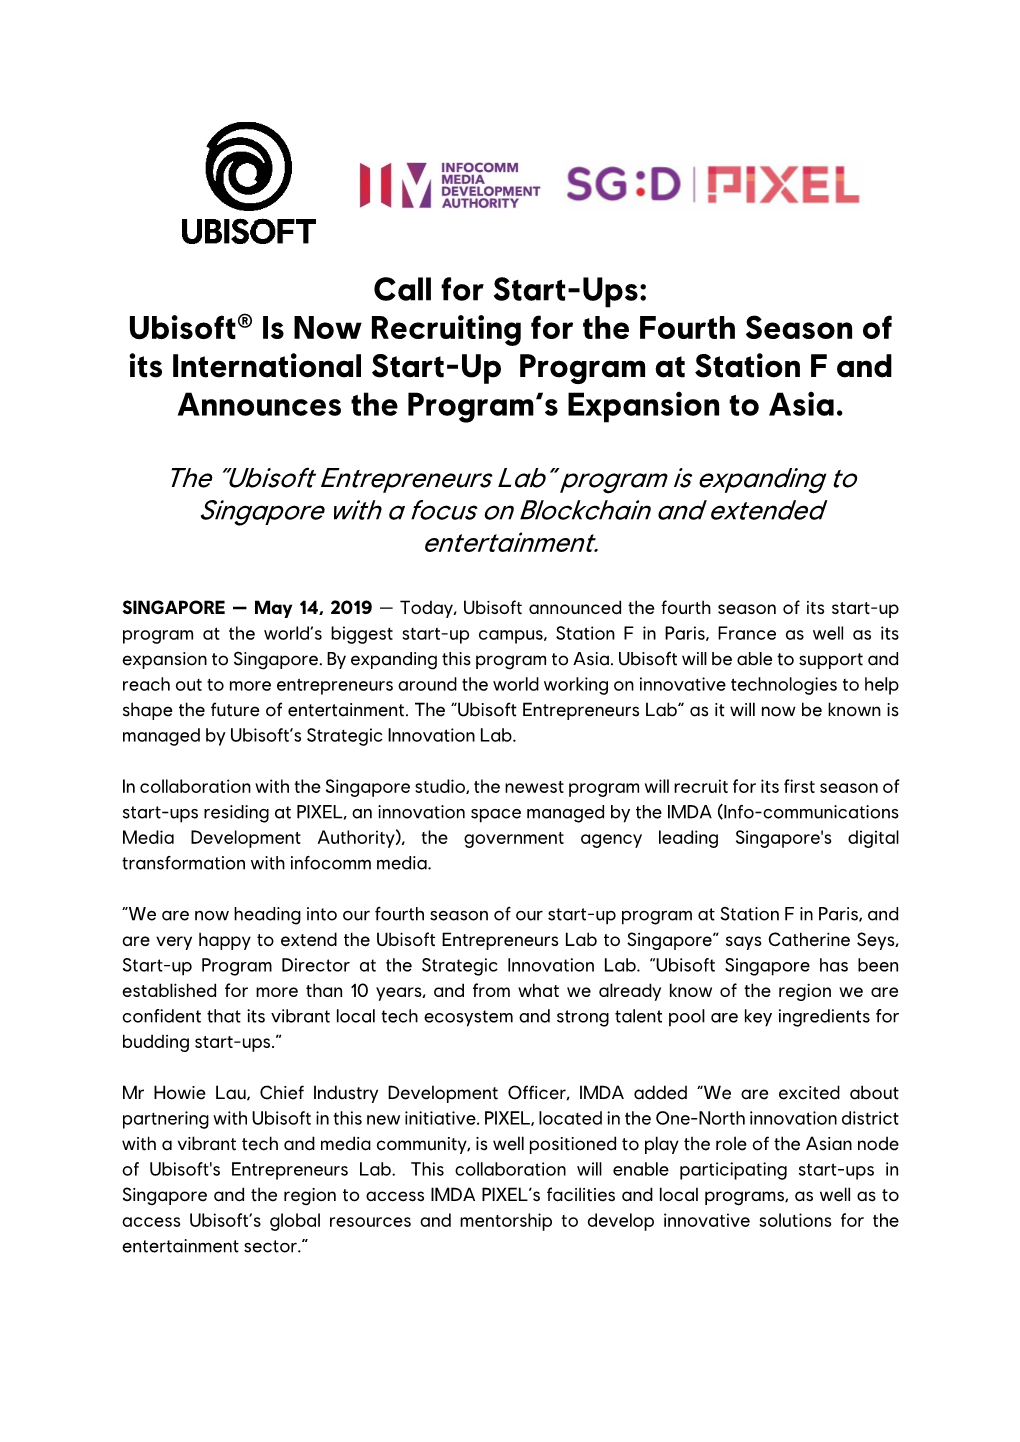 Ubisoft® Is Now Recruiting for the Fourth Season of Its International Start-Up Program at Station F and Announces the Program’S Expansion to Asia